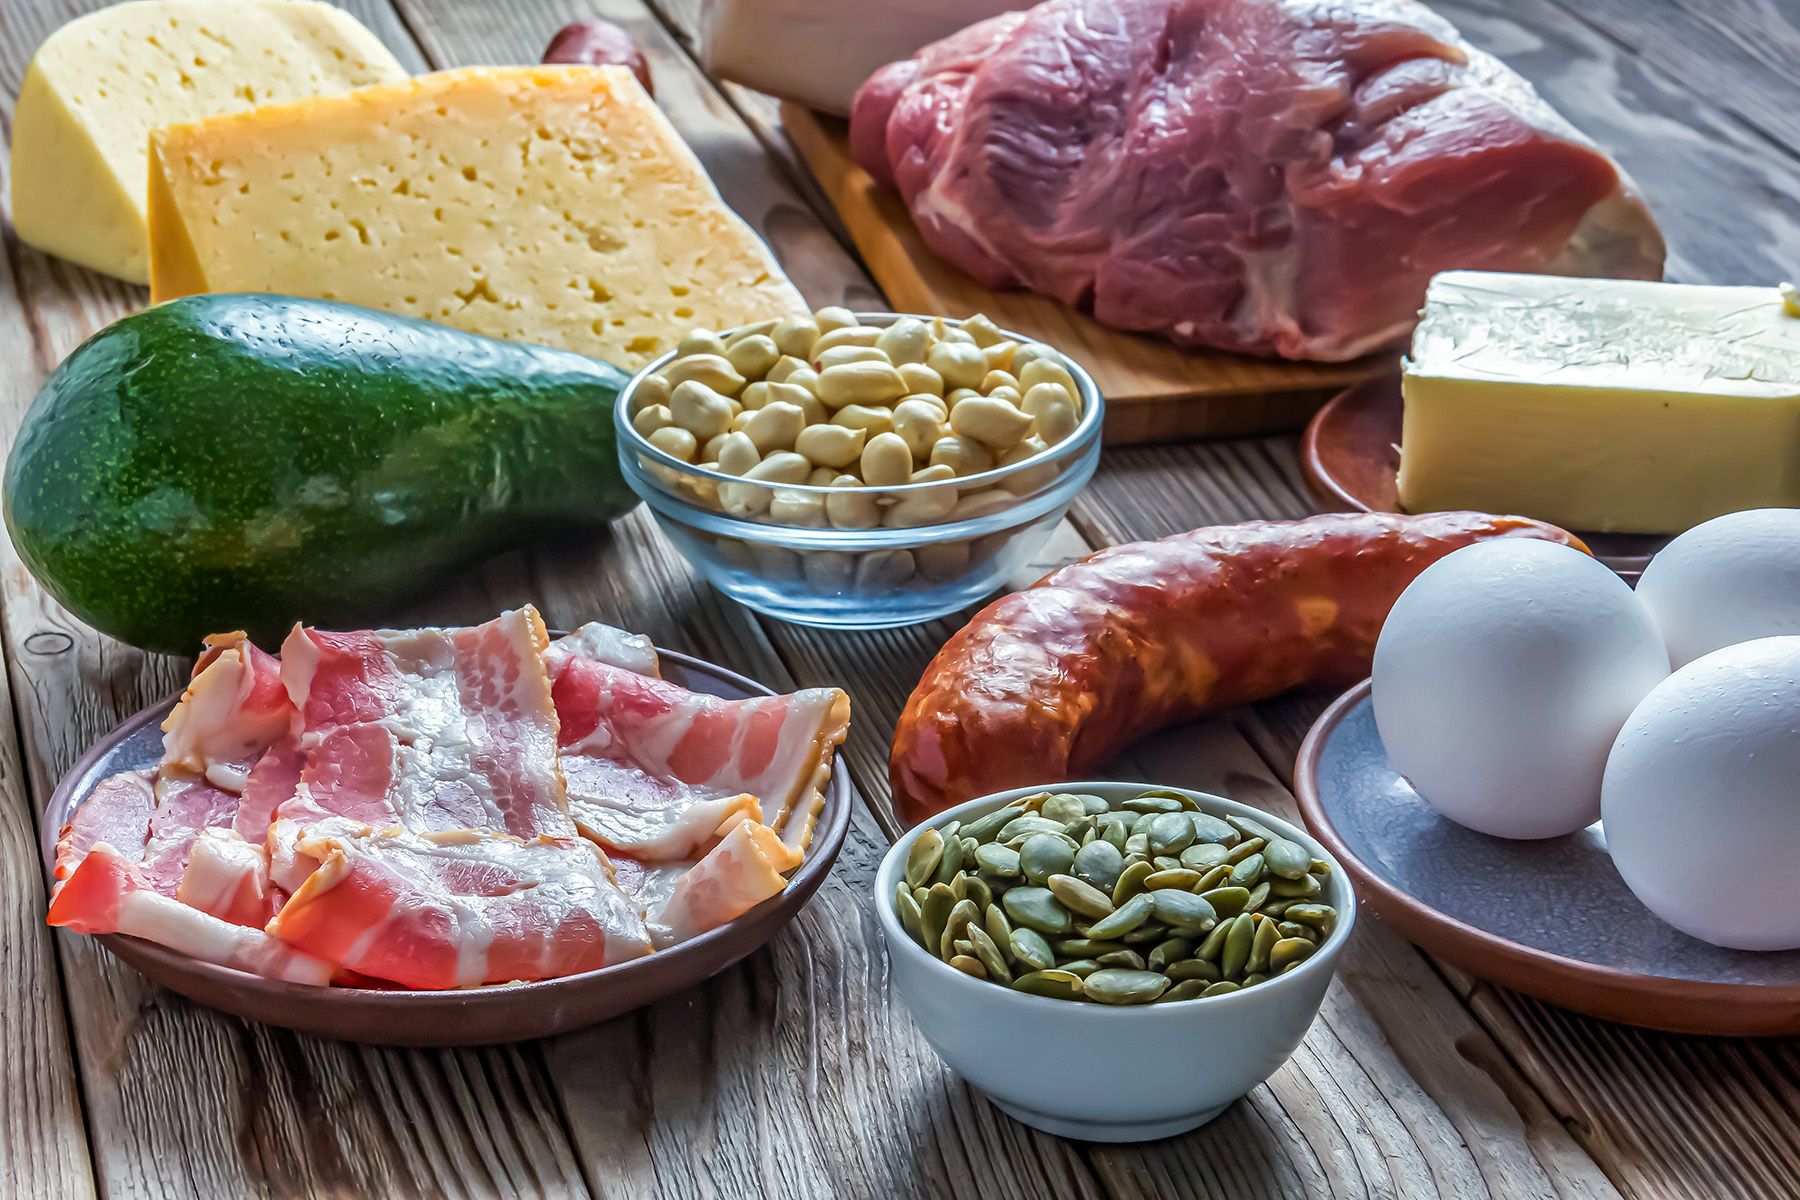 a glorious array of nuts, eggs, sausages, and fatty foods for a ketogenic diet